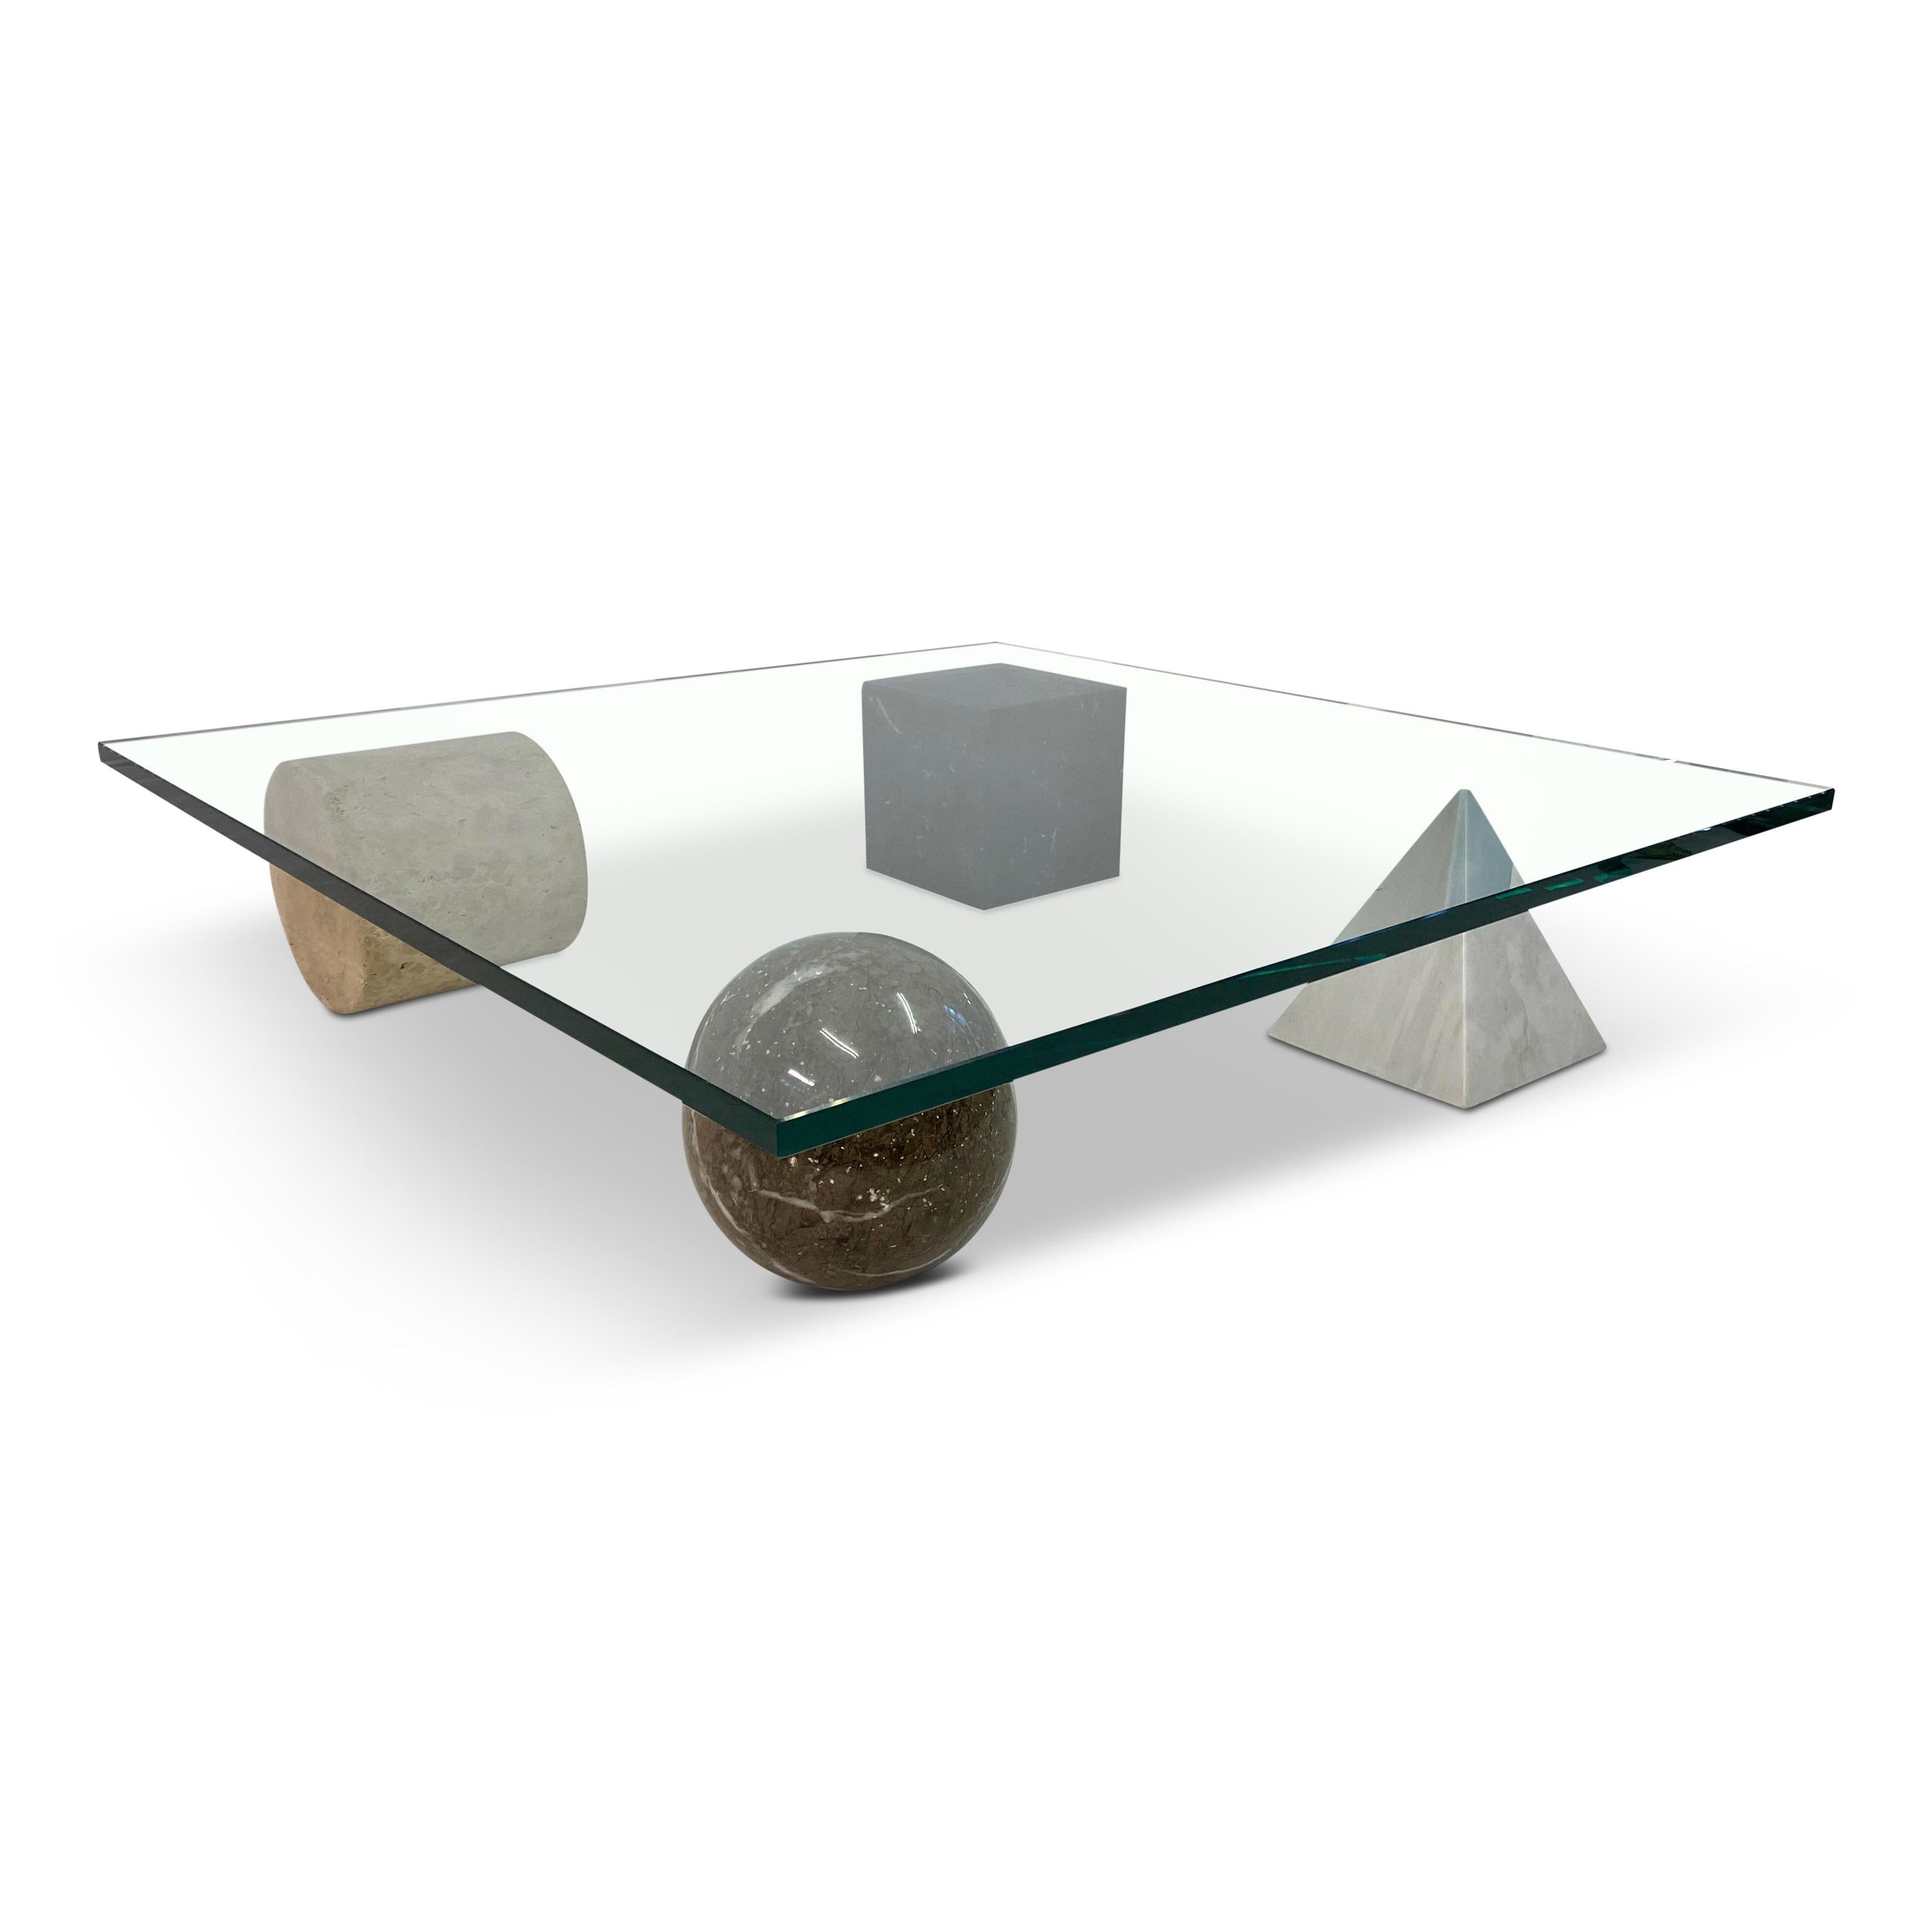 Metafora coffee table 

By Lella and Massimo Vignelli

Marble and travertine 3D shapes

Cube, pyramid, sphere and cylinder

Italy, 1979.

Measures: 20mm glass.